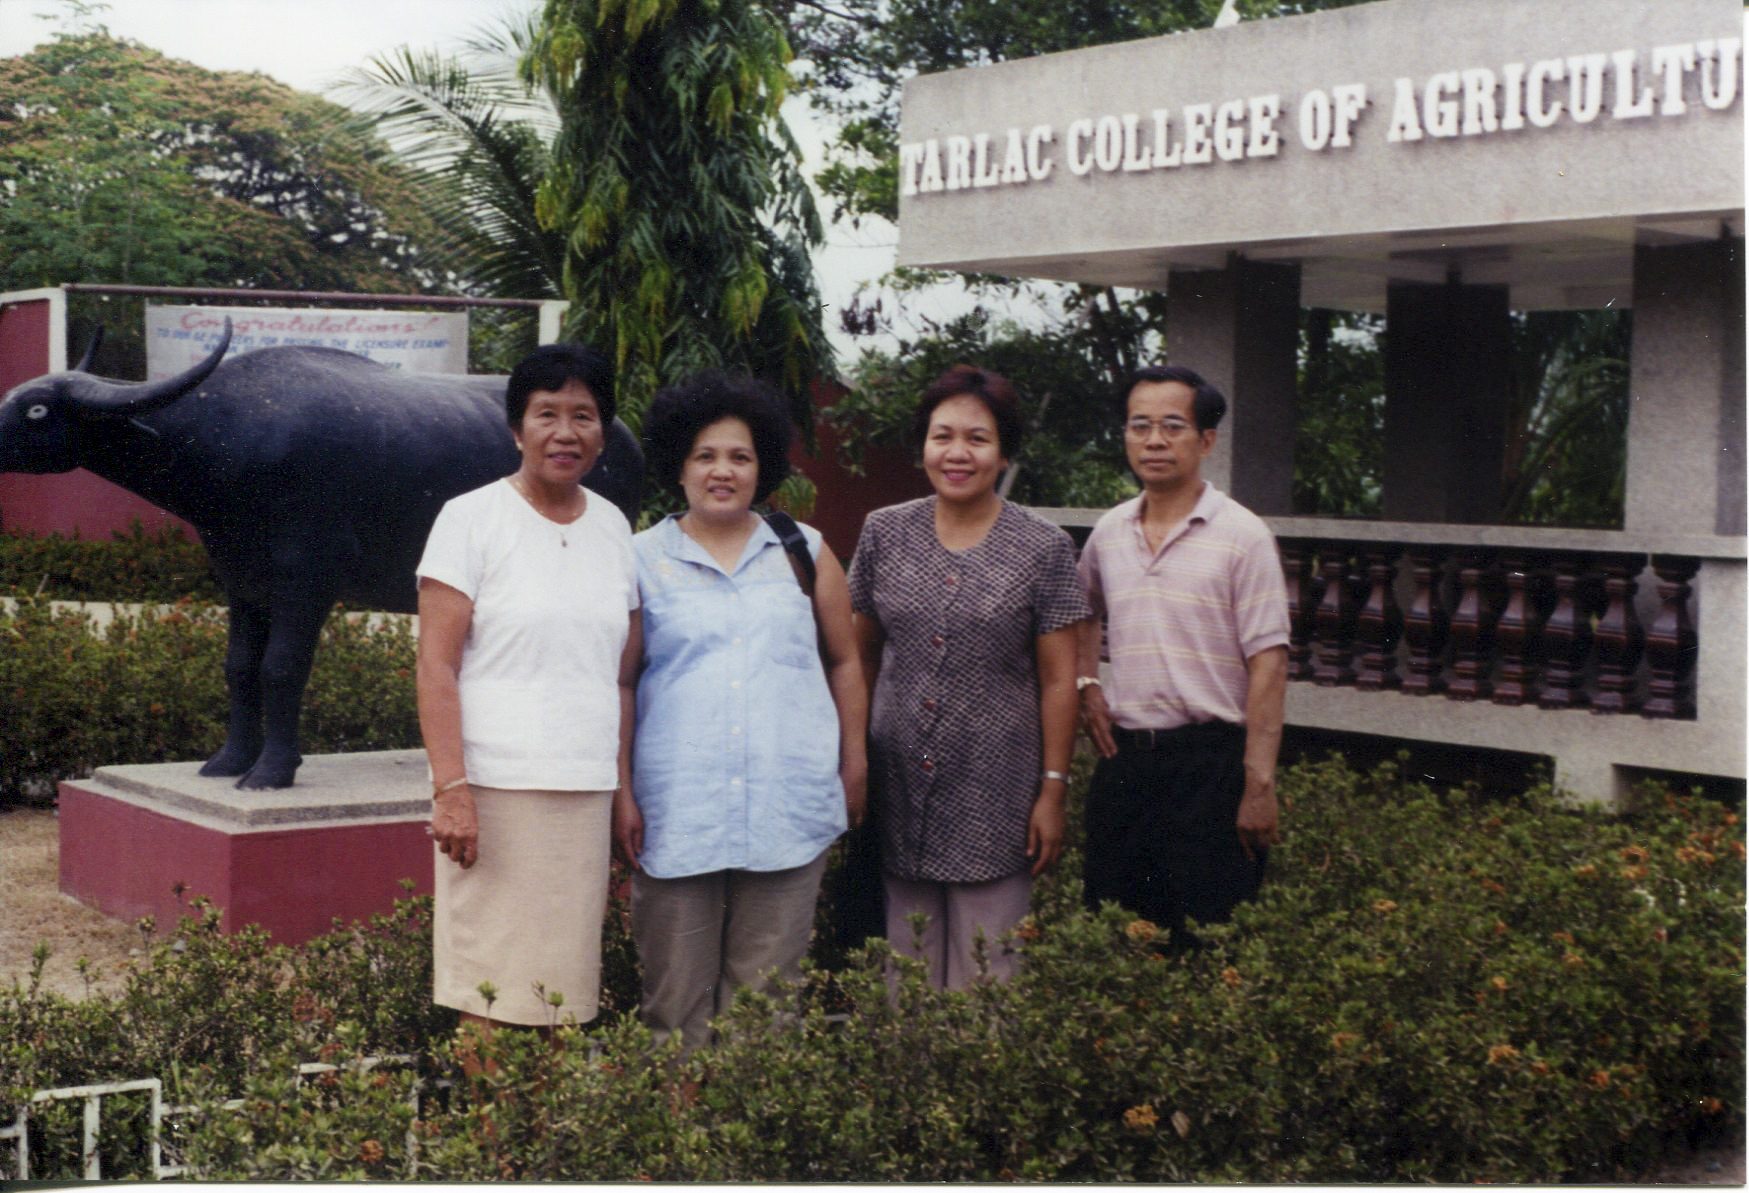 Photo of Carnate, wife, and friends, 1960'sTaken in the 1960's at Tarlac College of Agriculture (1st high school, attended one year; opened up schooling for him)- acquired while visiting Philippines. Left to right: friend/teacher, wife Olivia, friend, Orlando. Any views, findings, conclusions, or recommendations expressed in this story do not necessarily represent those of the National Endowment for the Humanities. 